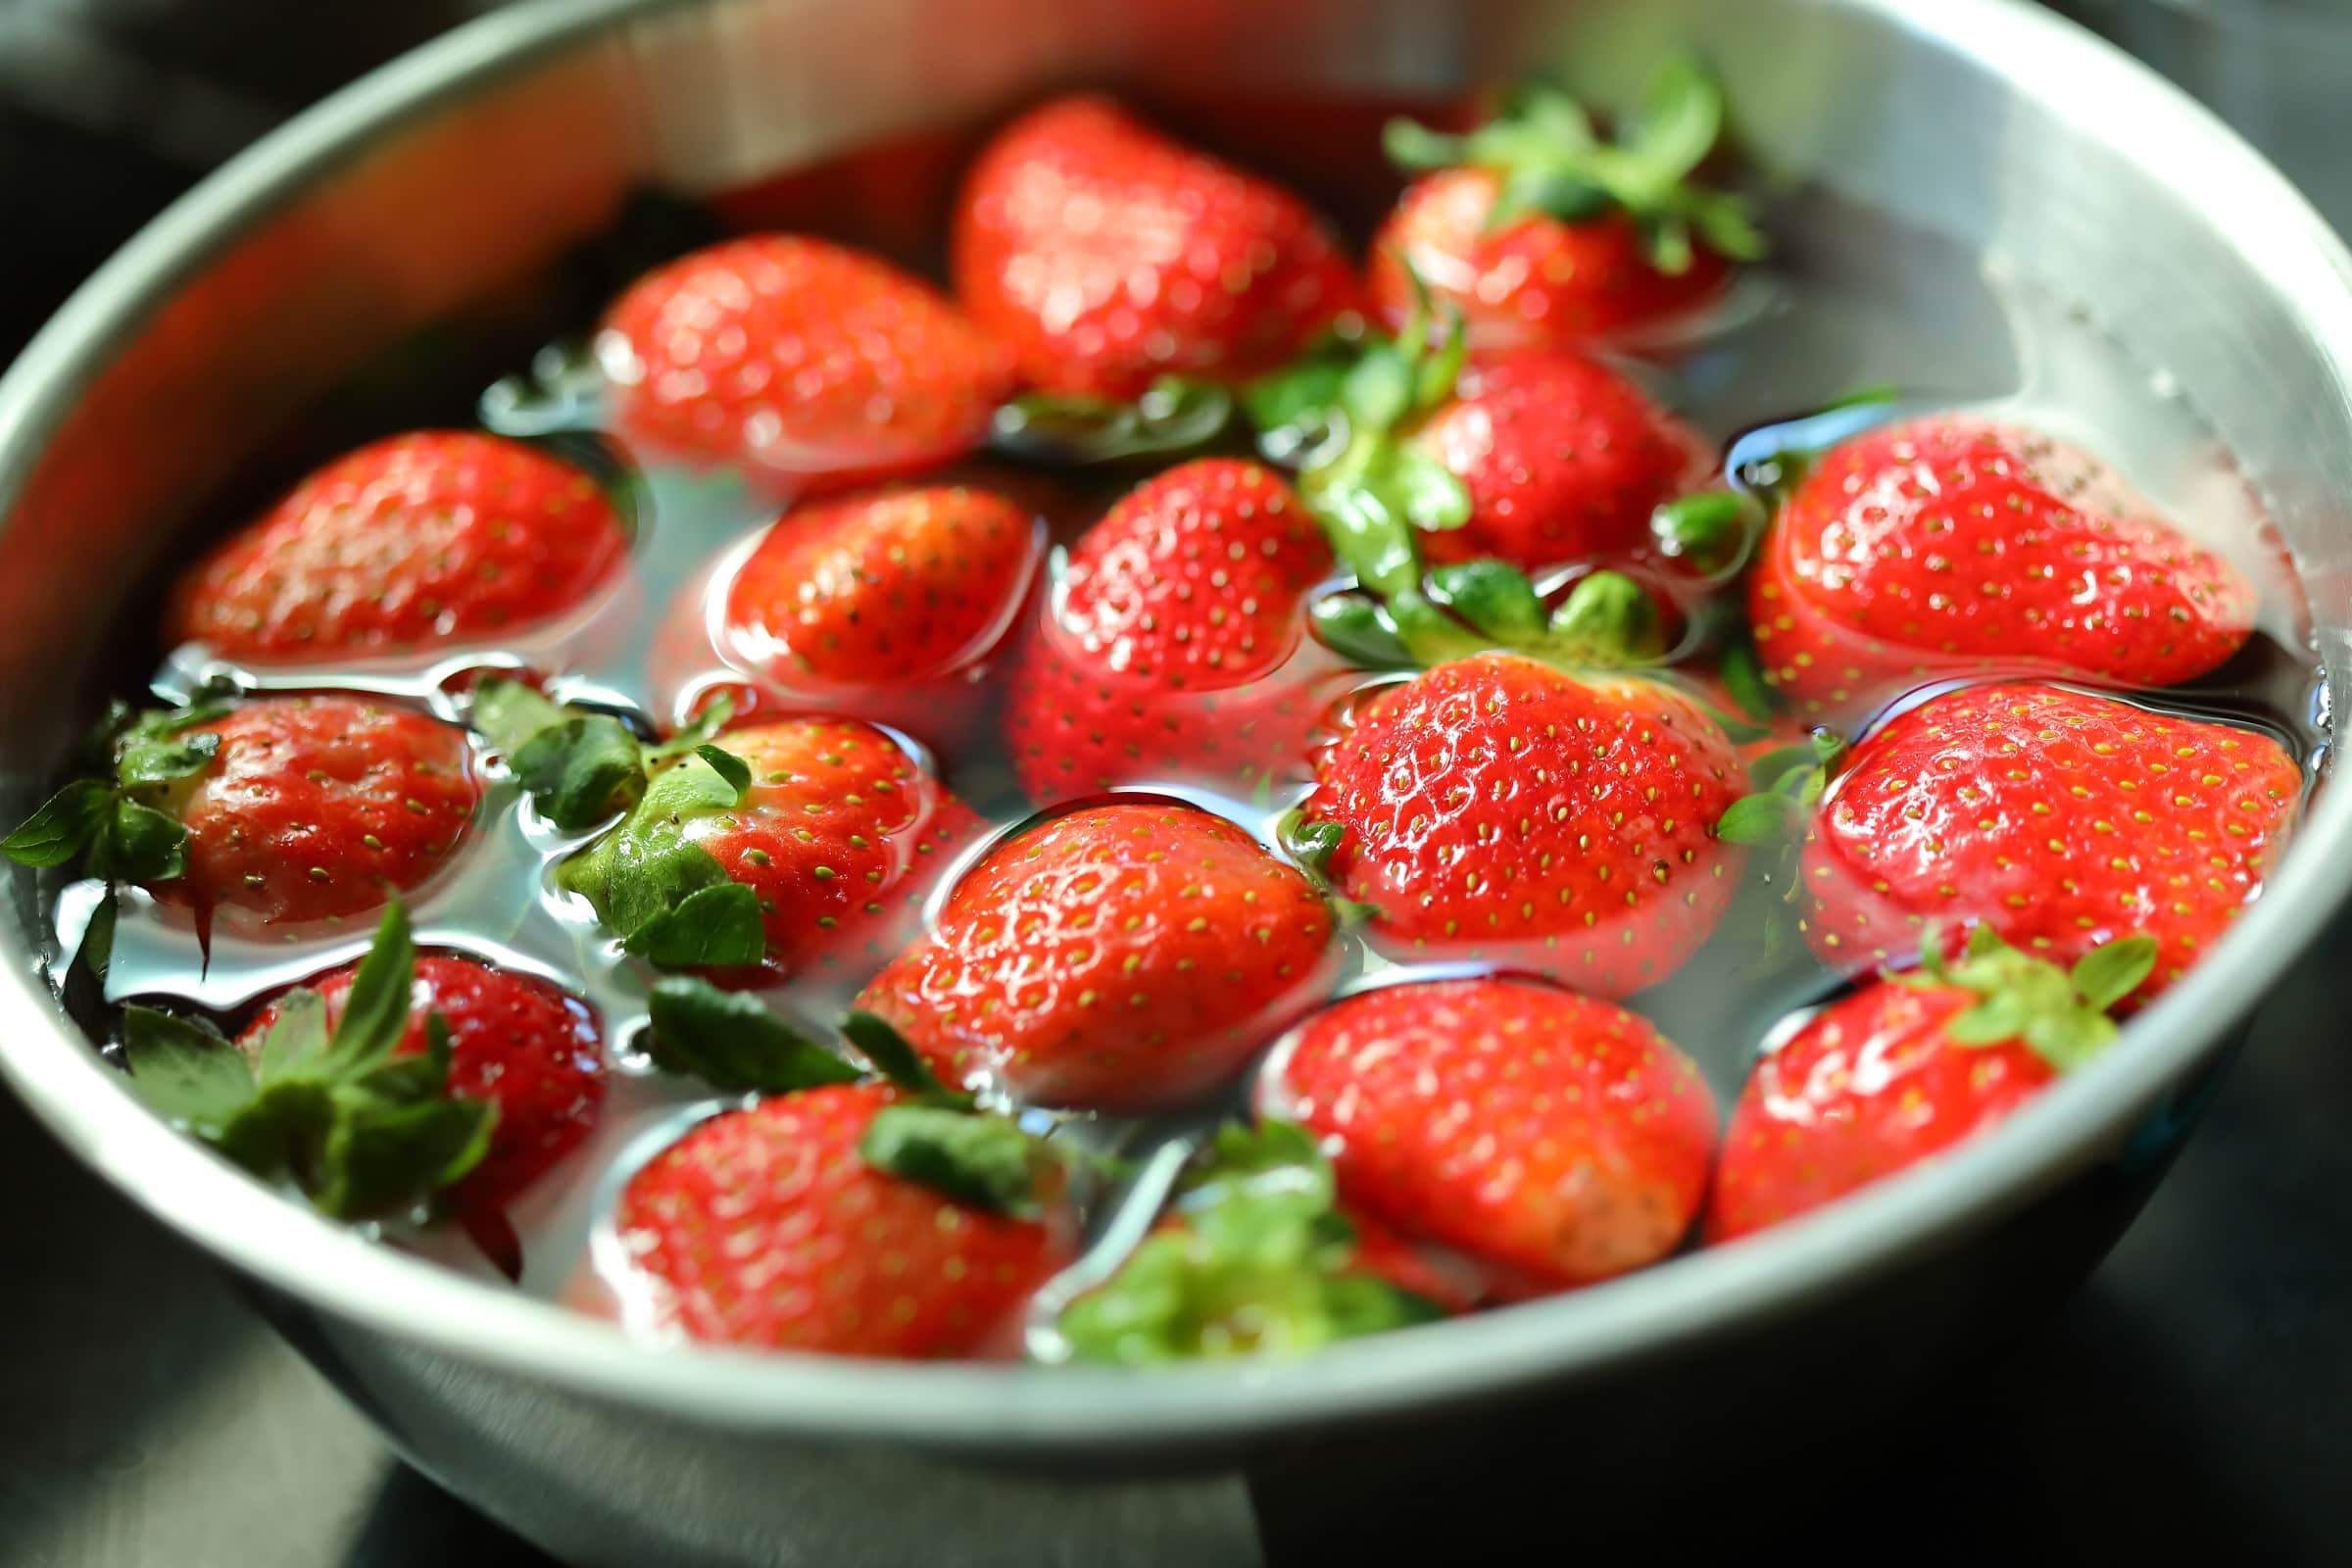 How To Clean Pesticides Off Of Strawberries